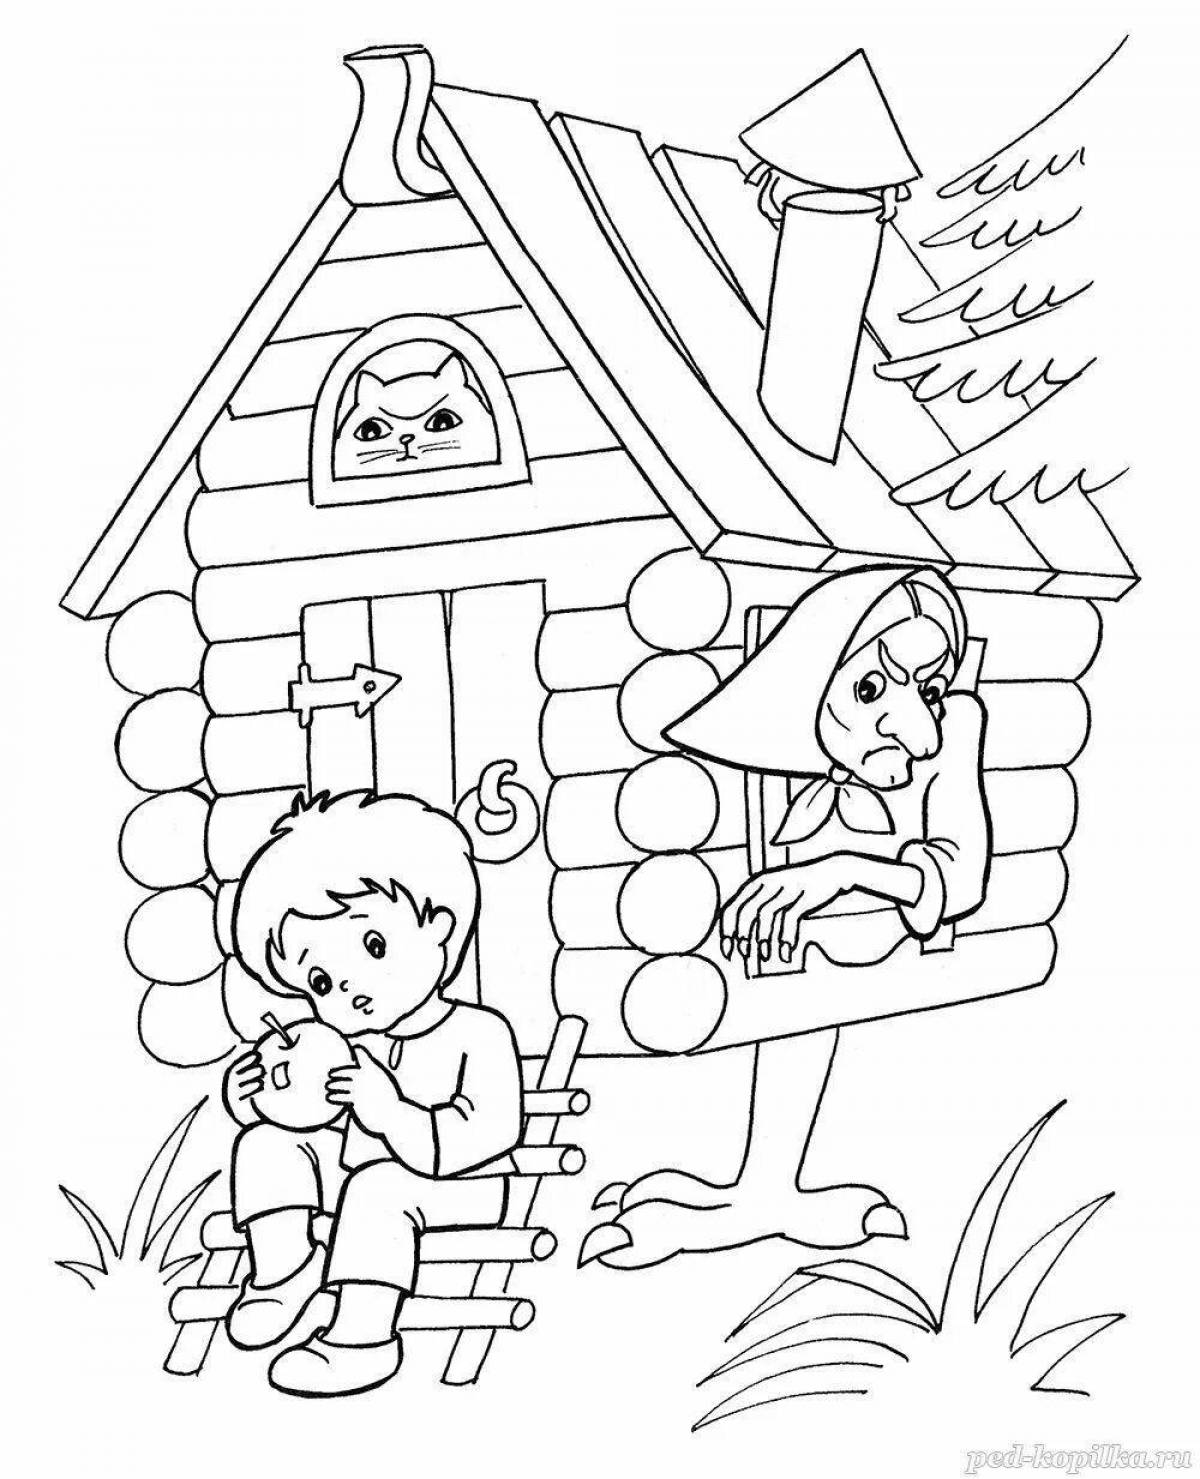 Adorable geese and swans coloring book for 3-4 year olds